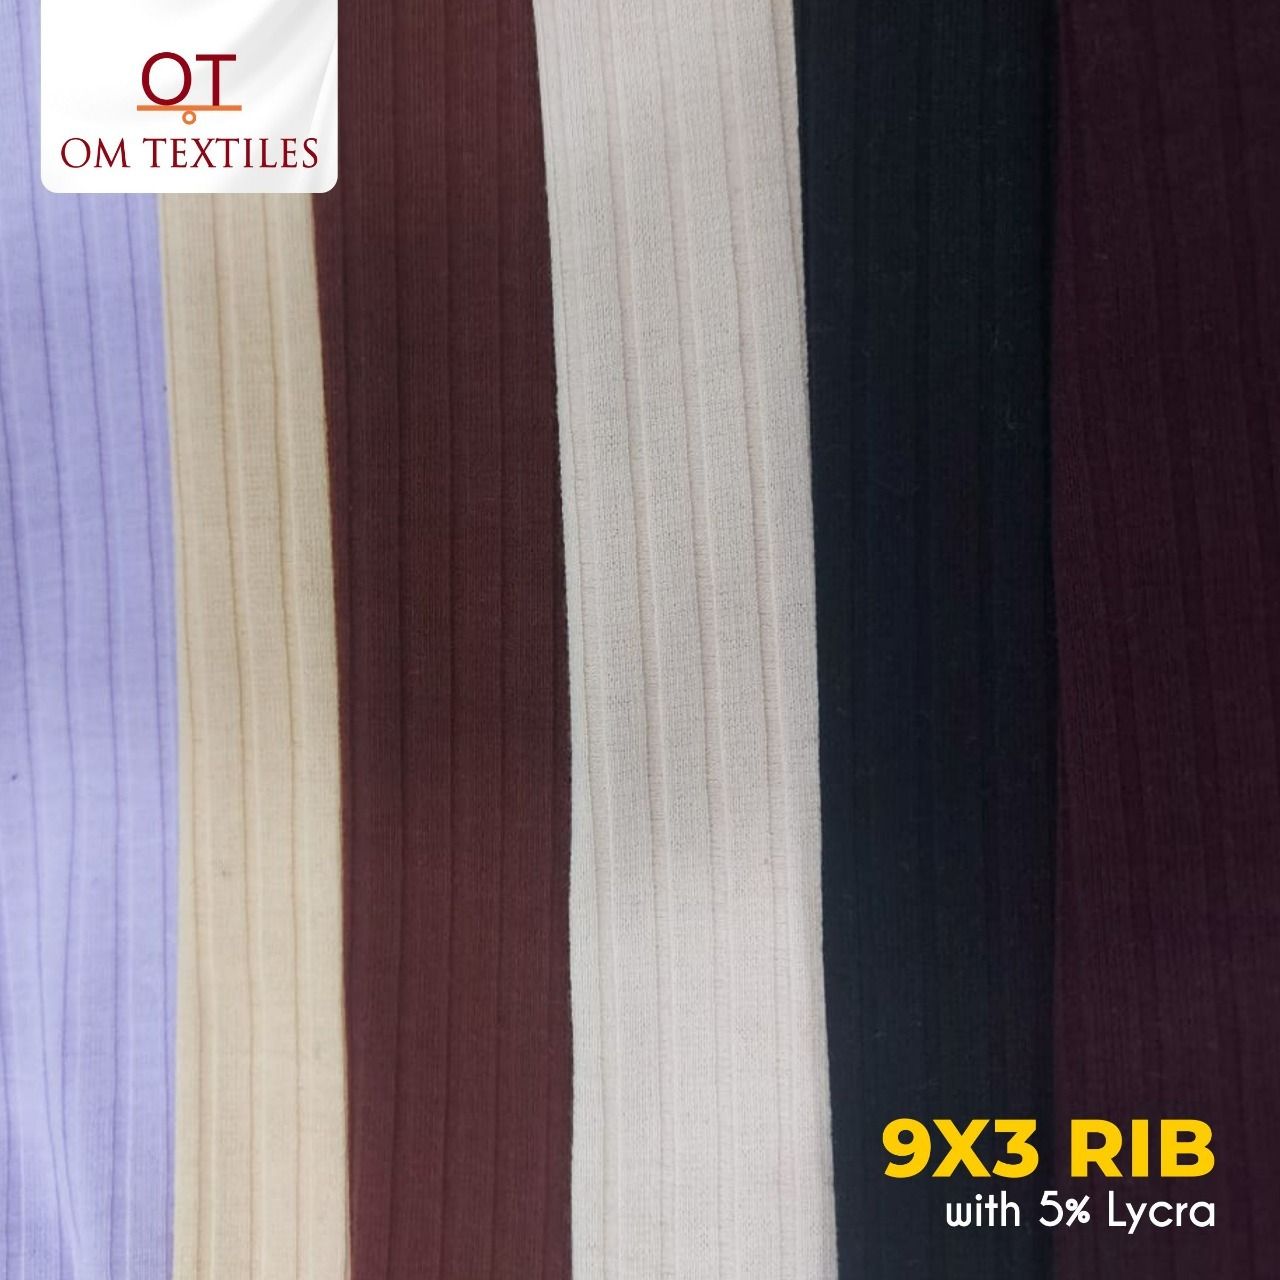 9X3 ribbed knitted fabric